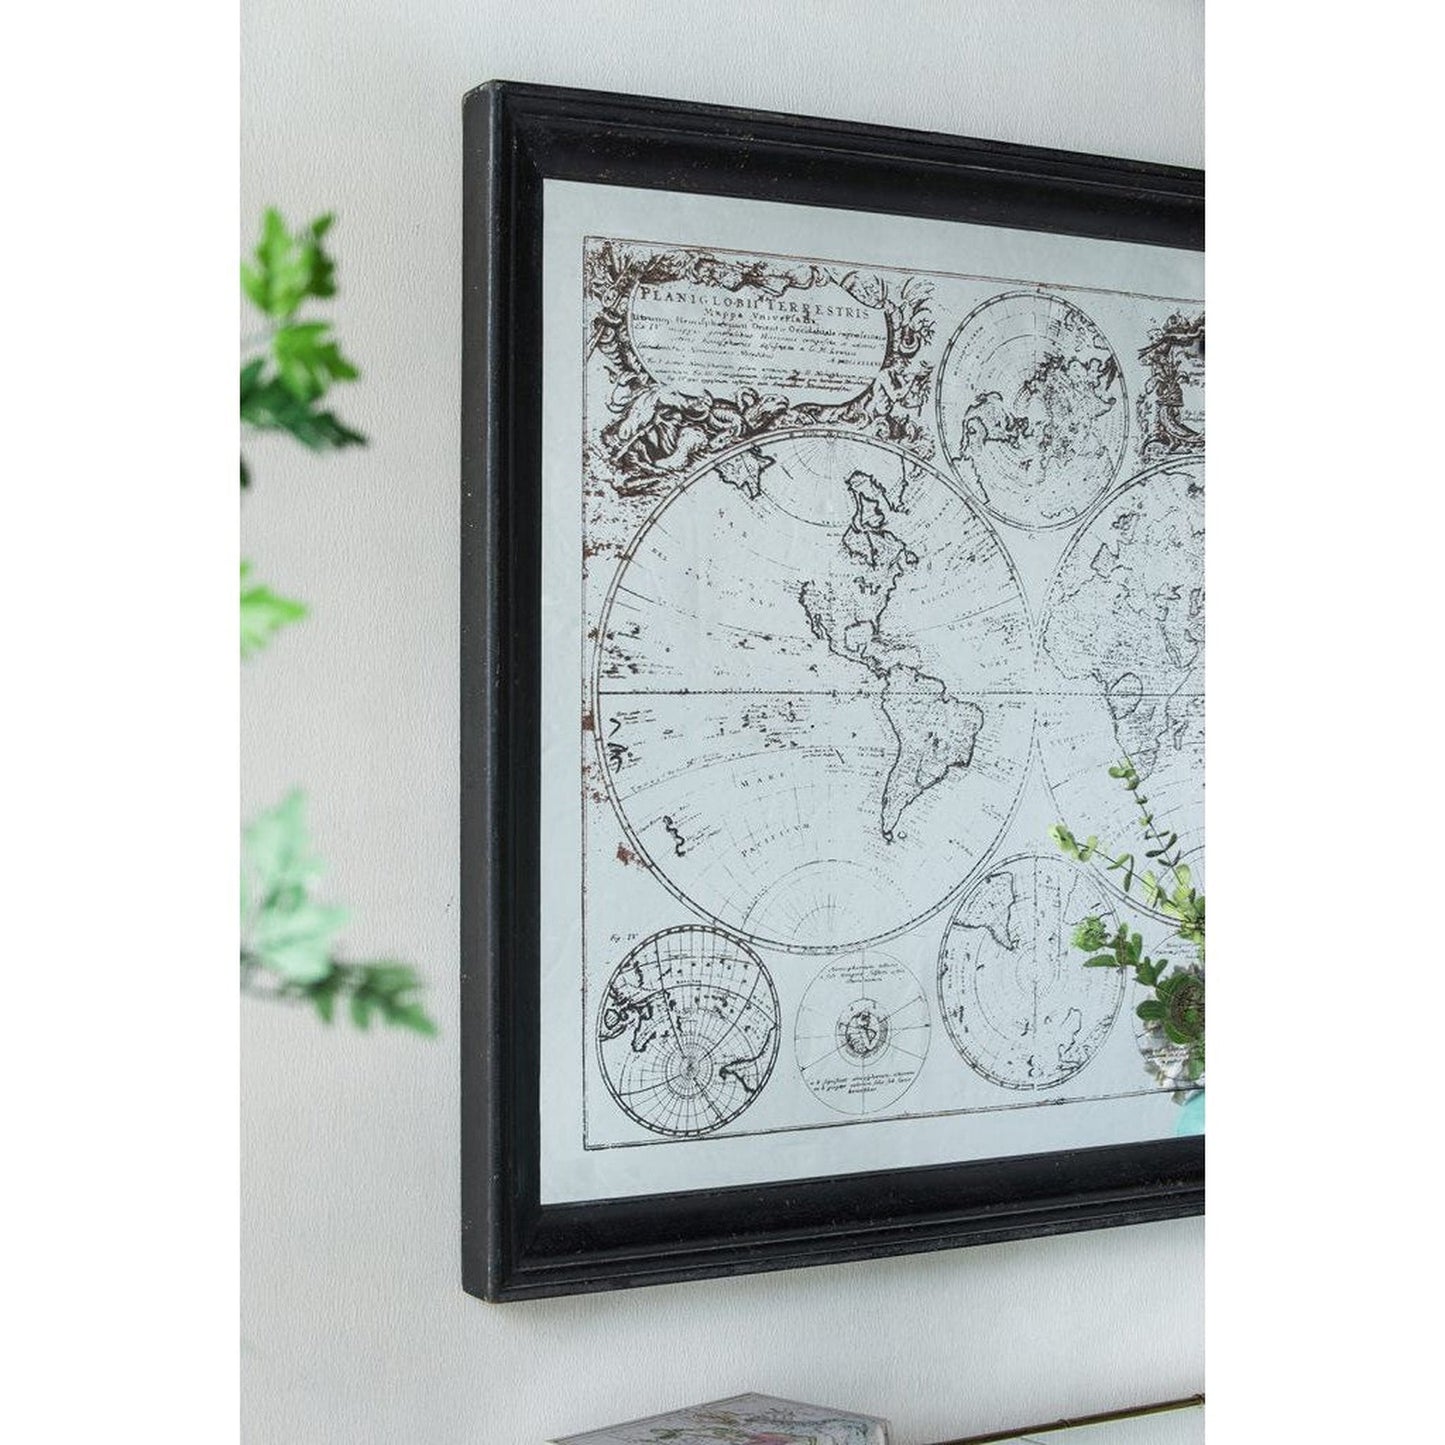 A&B Home 42" x 31" Bundle of 9 Rectangular Vintage-Style World Map in Dark Brown Wooden Framed Wall-Mounted Mirror